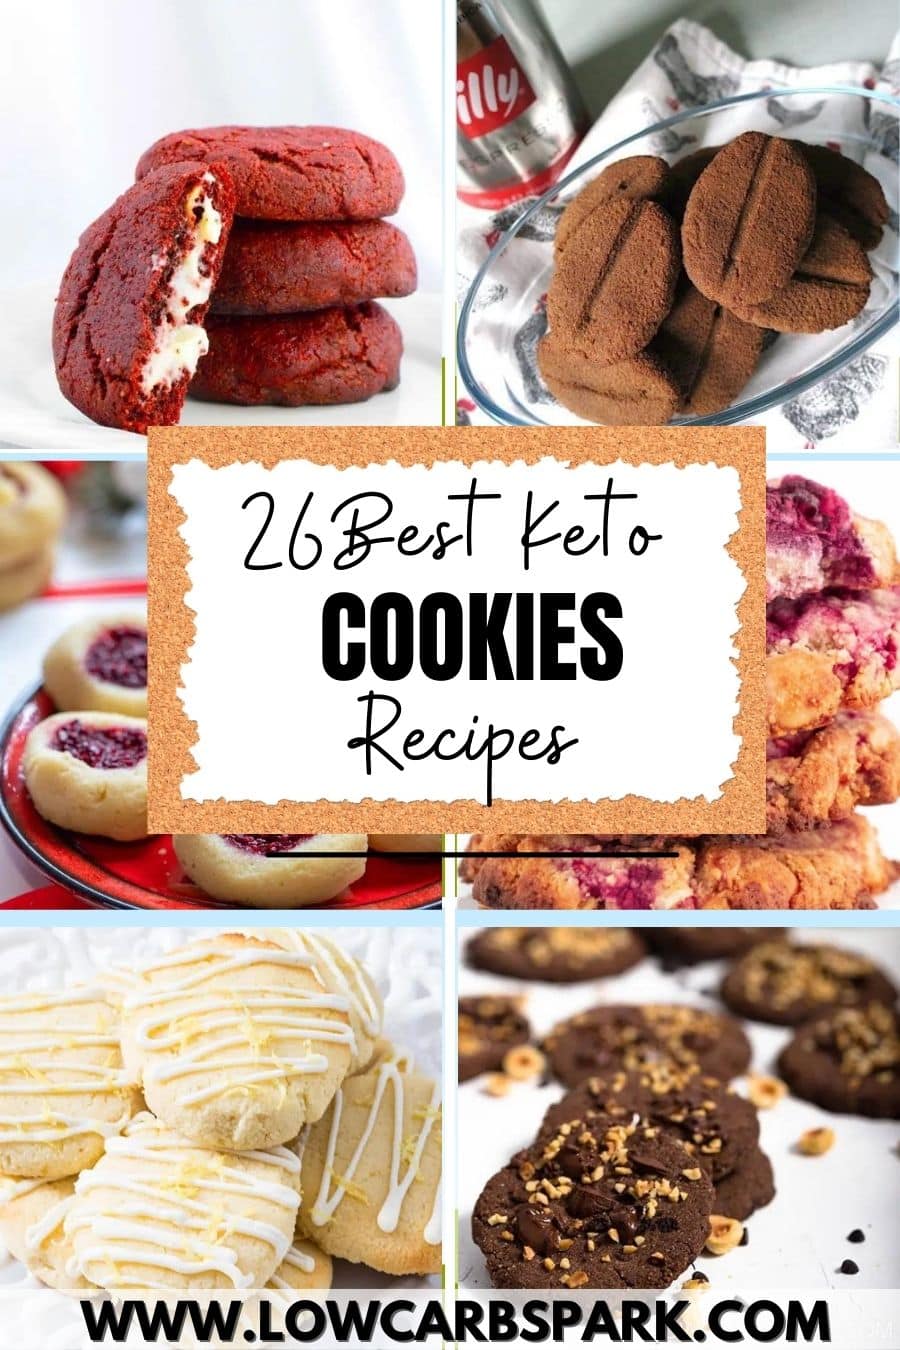 26 Keto Cookies Recipes - Best Low Carb Cookies Recipes